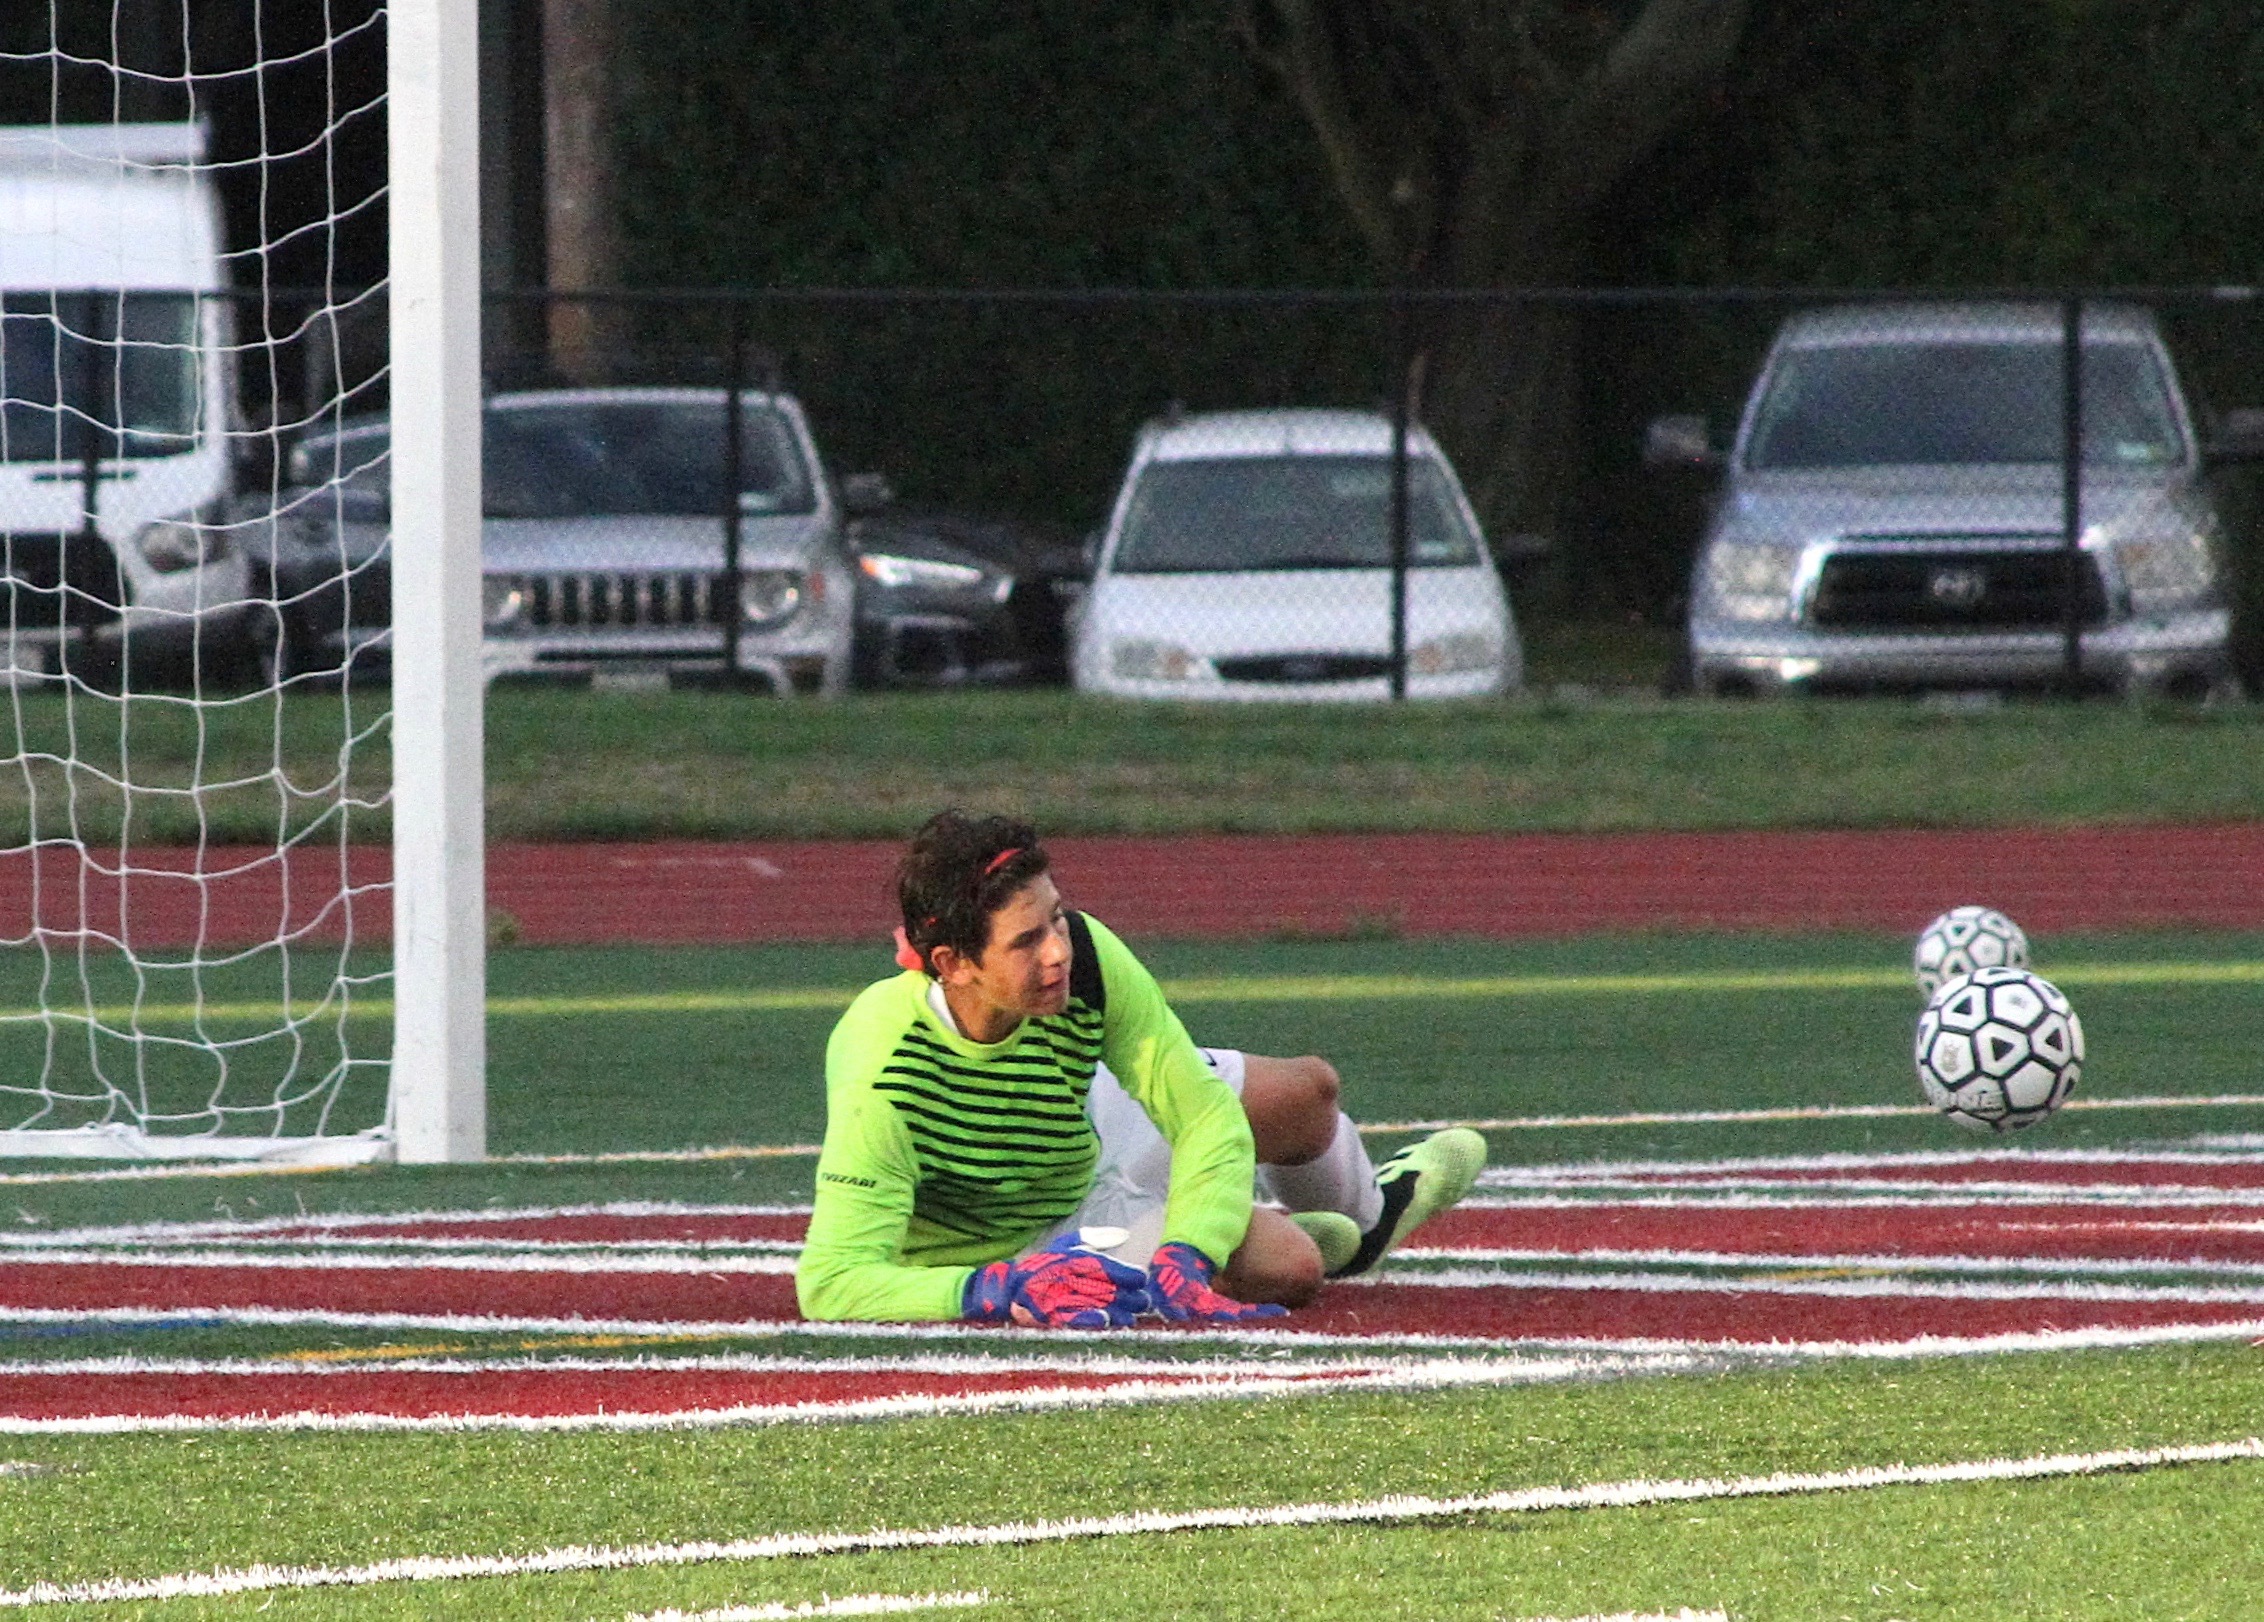 Pierson's Gavin Gilbride comes out of the net to make a save. DESIRÉE KEEGAN